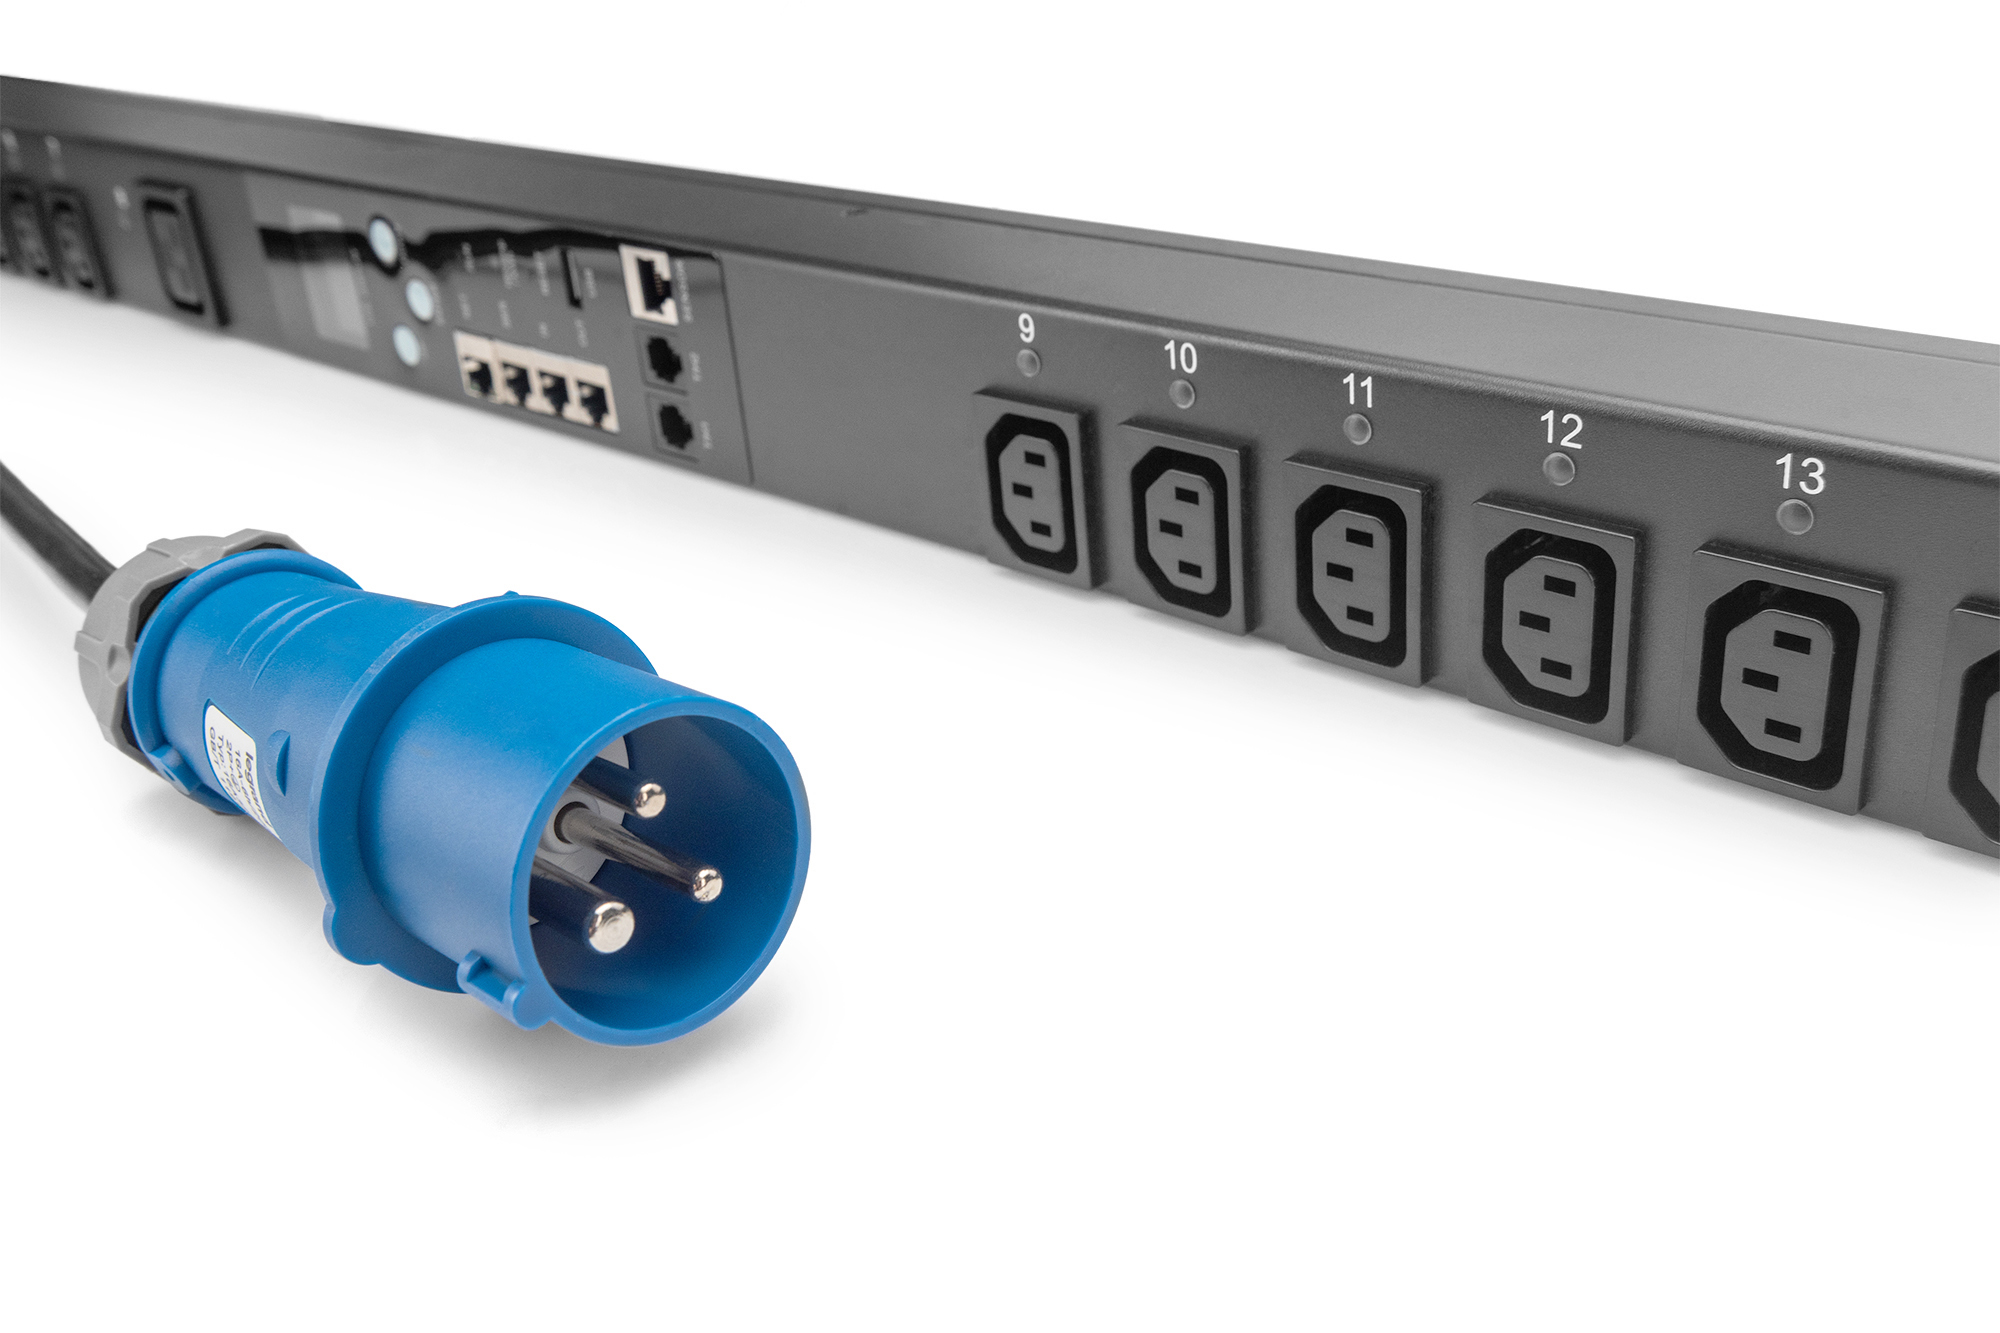 DIGITUS Smart PDU, Outlet Monitored & Switched, 1 ingresso x16A, uscite 20 x C13, 4 x C19